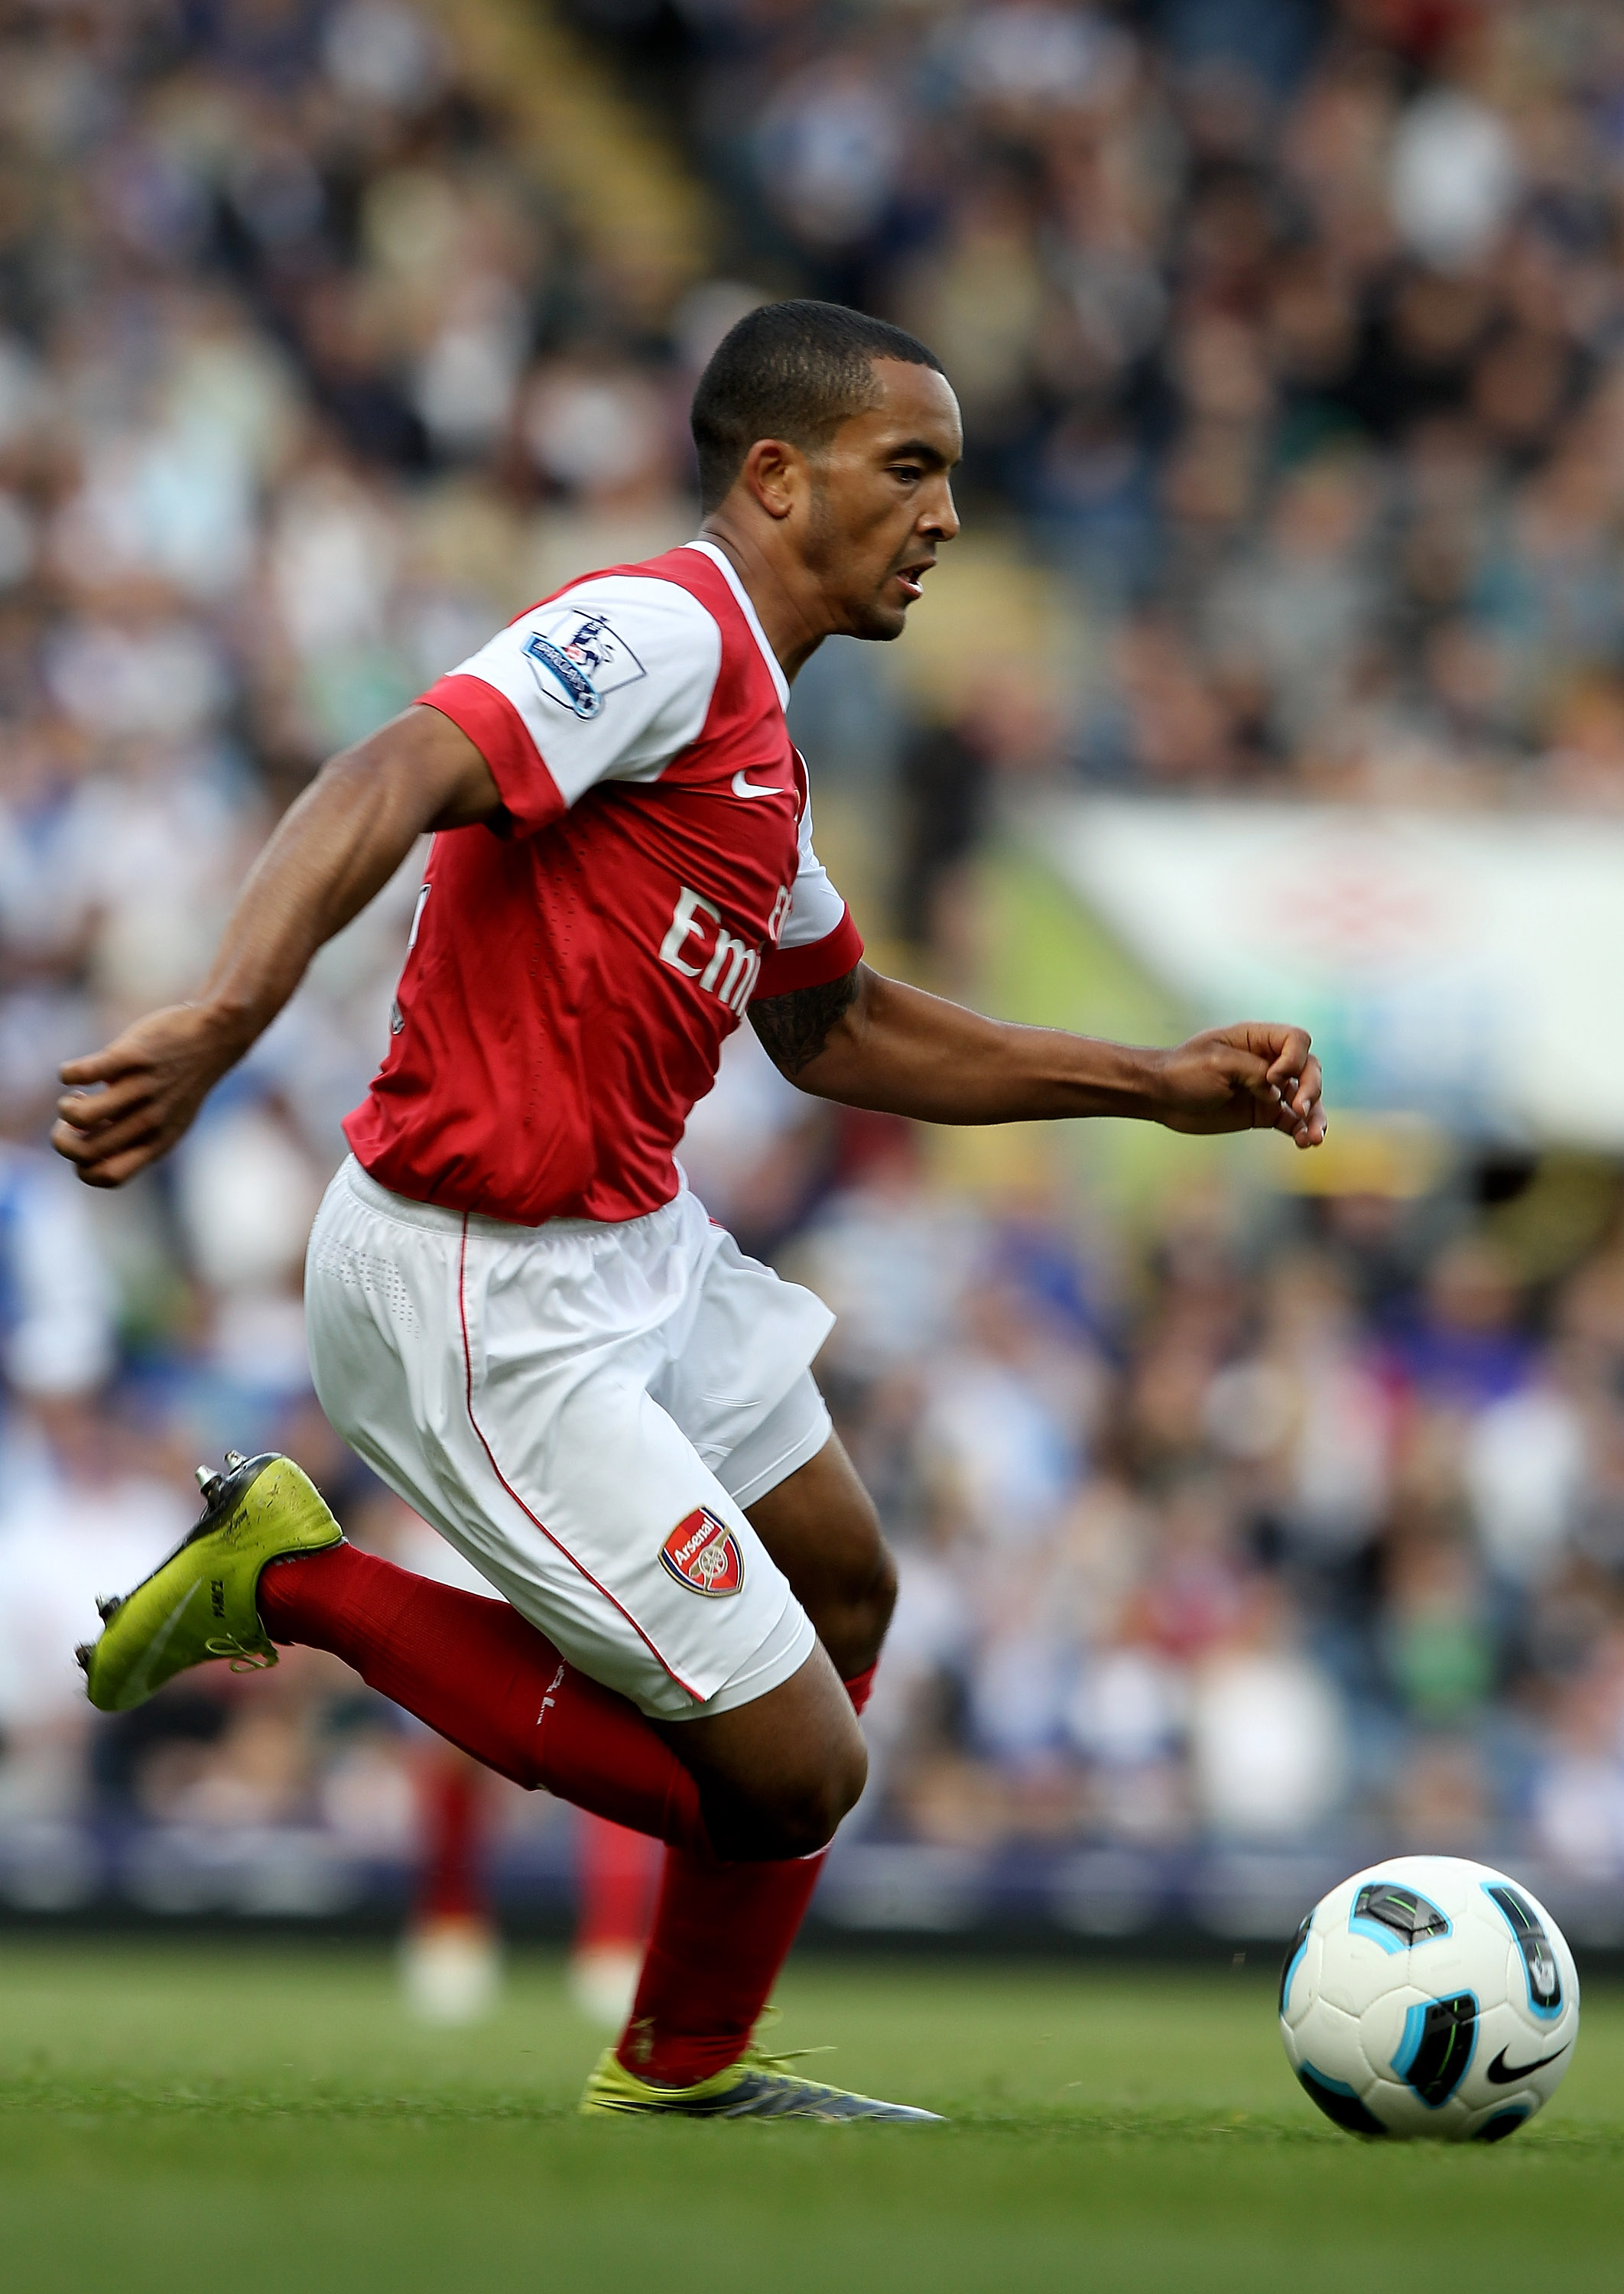 BLACKBURN, ENGLAND - AUGUST 28:  Theo Walcott of Arsenal in action during the Barclays Premier League match between Blackburn Rovers and Arsenal at Ewood Park on August 28, 2010 in Blackburn, England.  (Photo by Clive Brunskill/Getty Images)